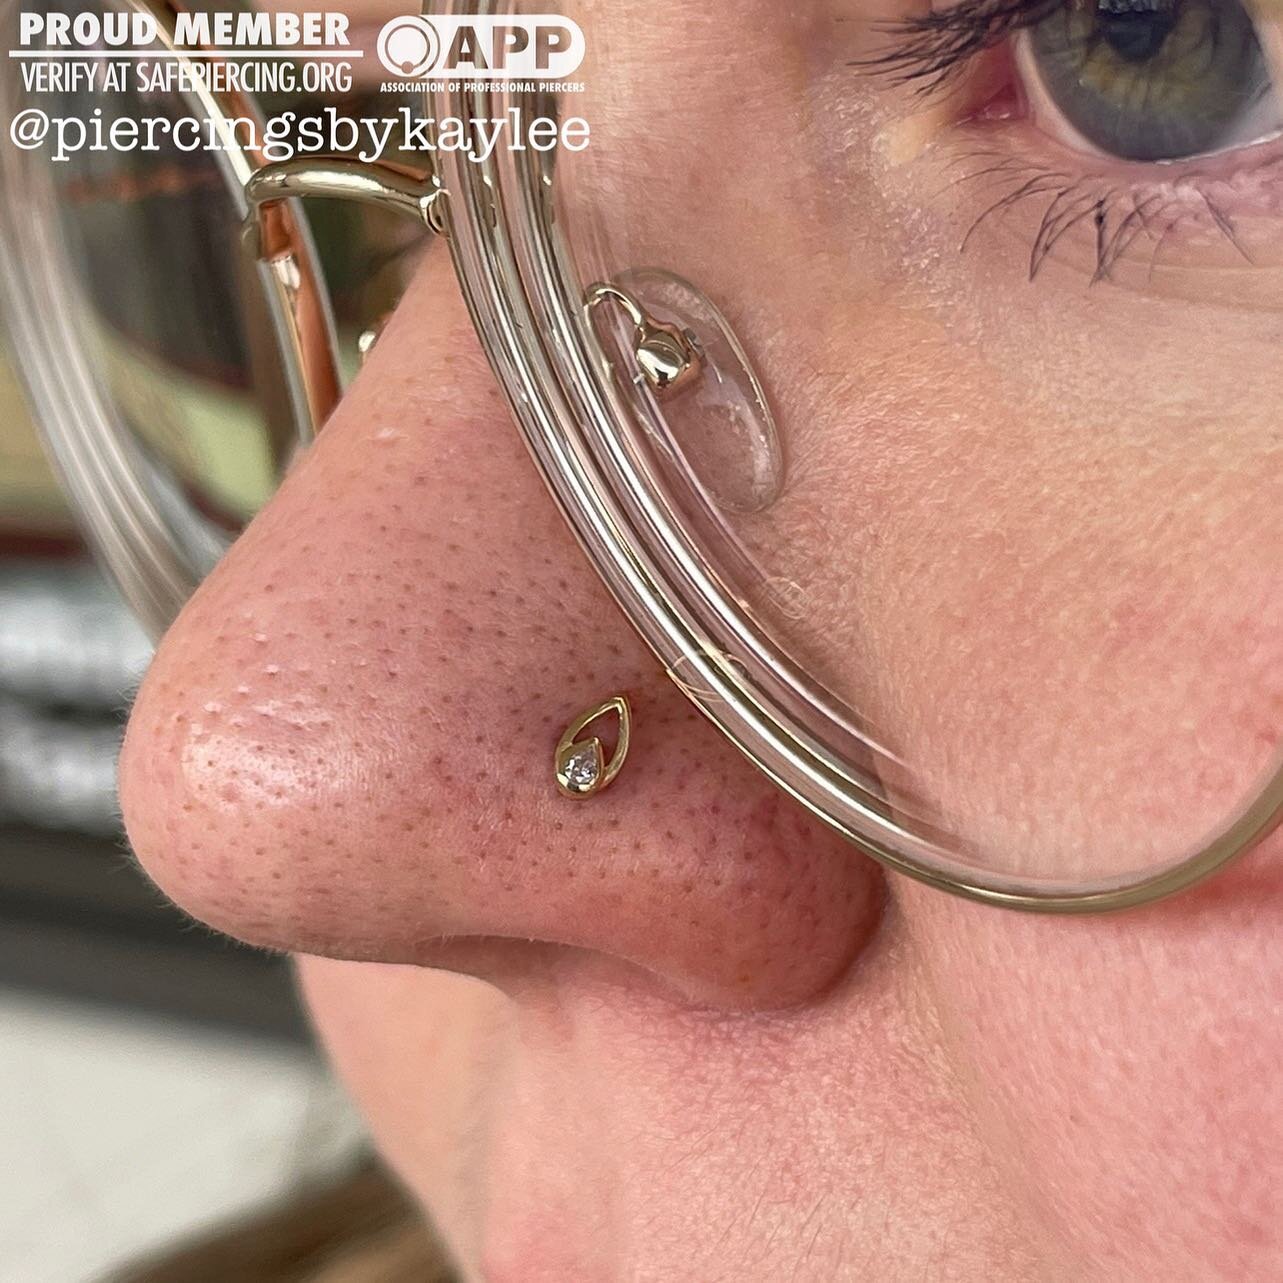 Had the pleasure of piercing this nostril with this gorgeous 14k yellow gold Echo end &amp; it paired great with their gold framed glasses✨
.
.
.
.
#piercing #pierced #gold #yellowgold #nostrilpiercing #safepiercing #appmember #goldlove #piercerbabes